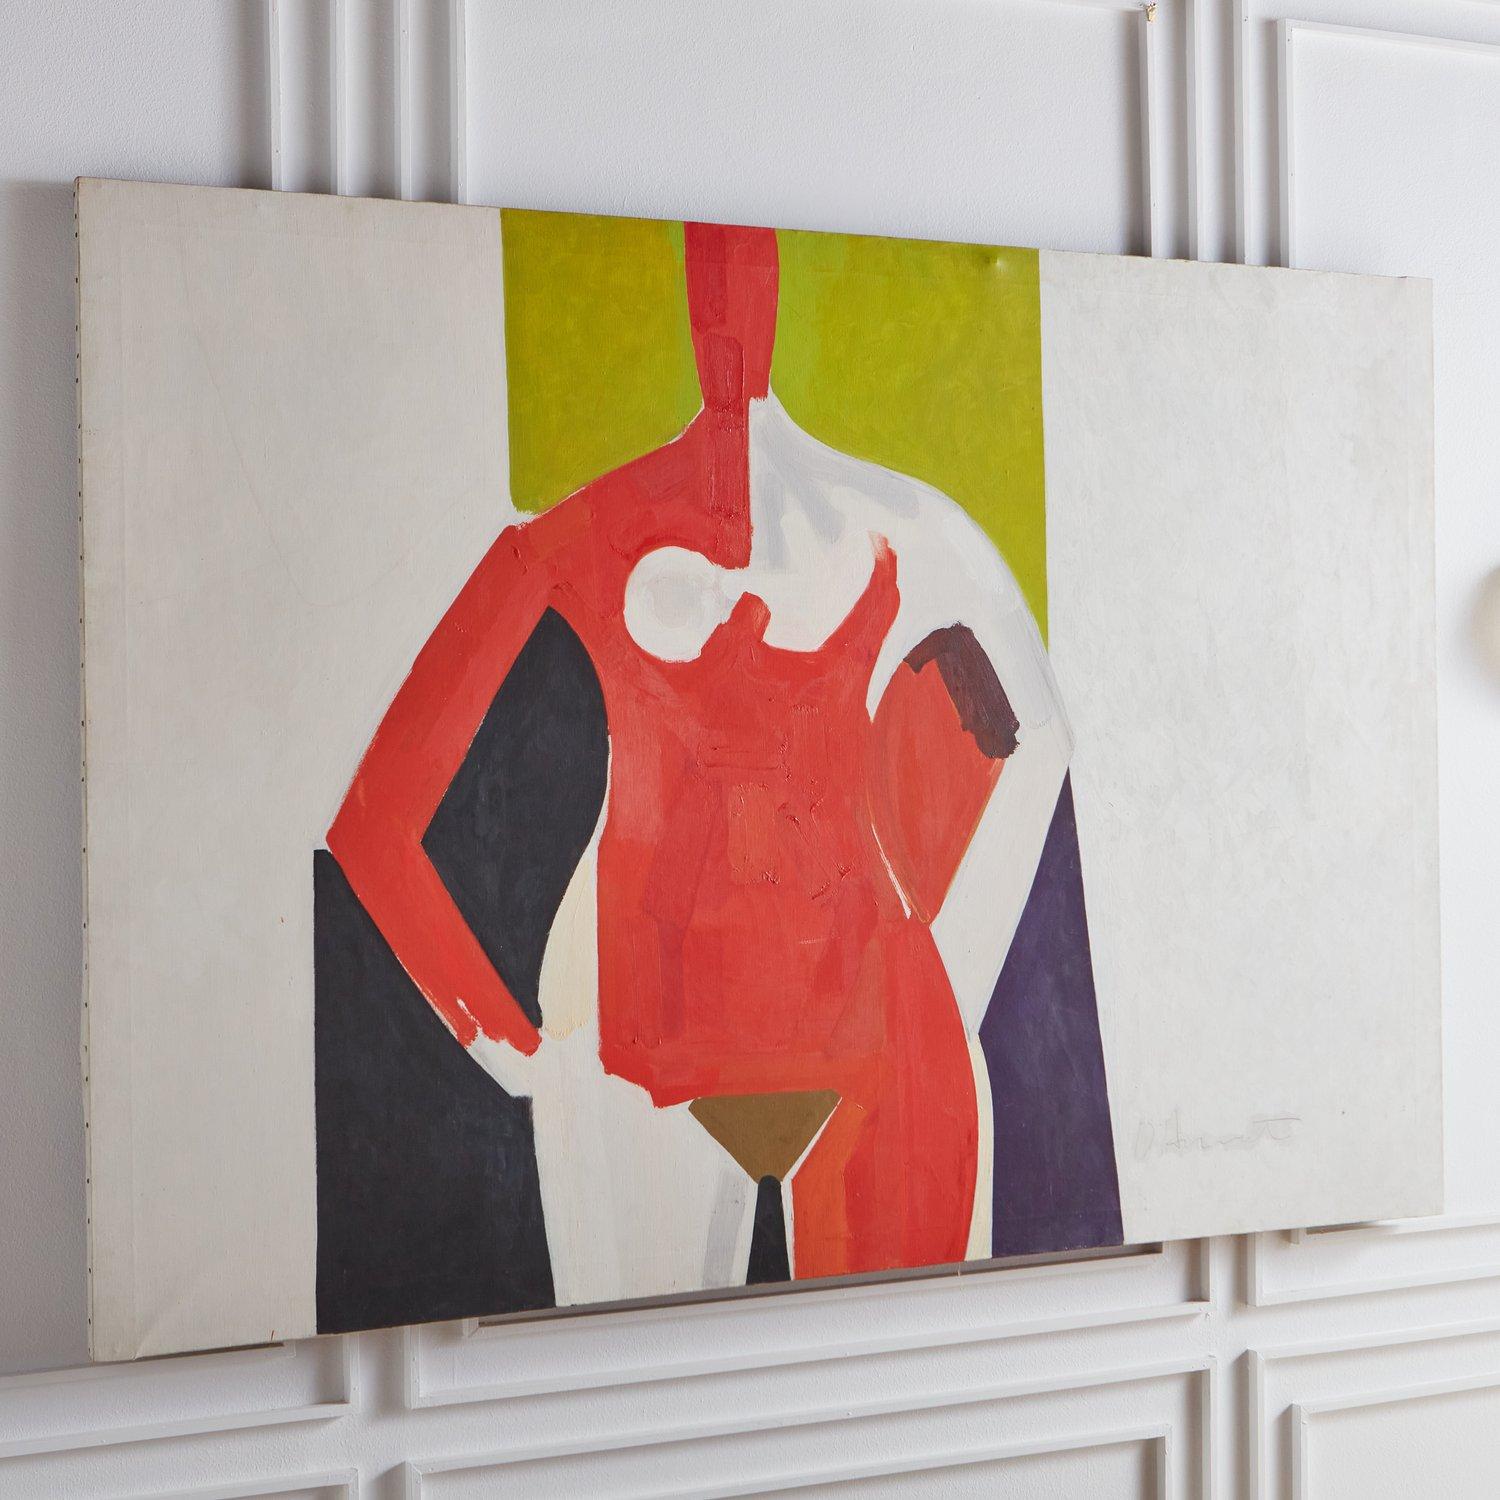 Late 20th Century Figural Modern Painting on Canvas by George D'Amato, 1990s For Sale